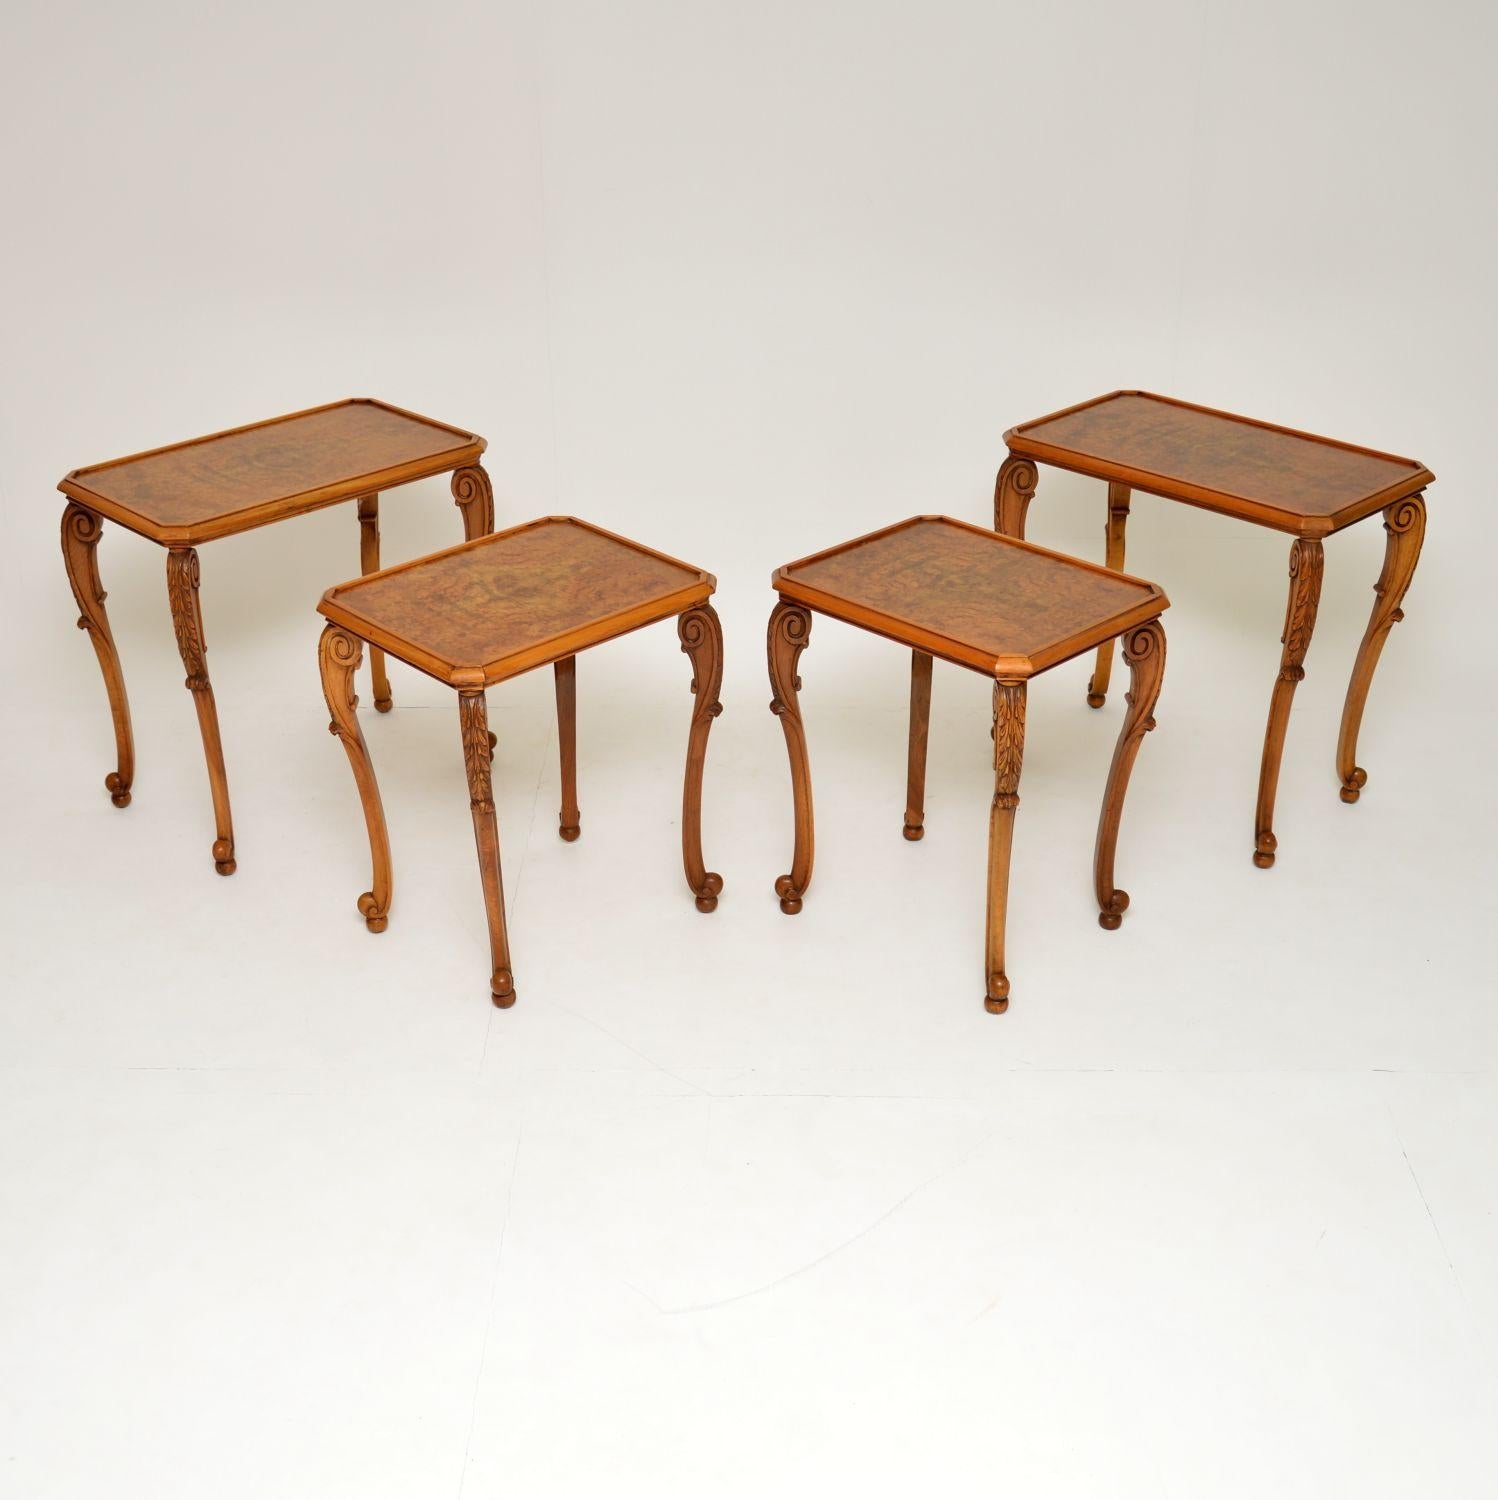 English Pair of Antique Burr Walnut Nesting Side Tables